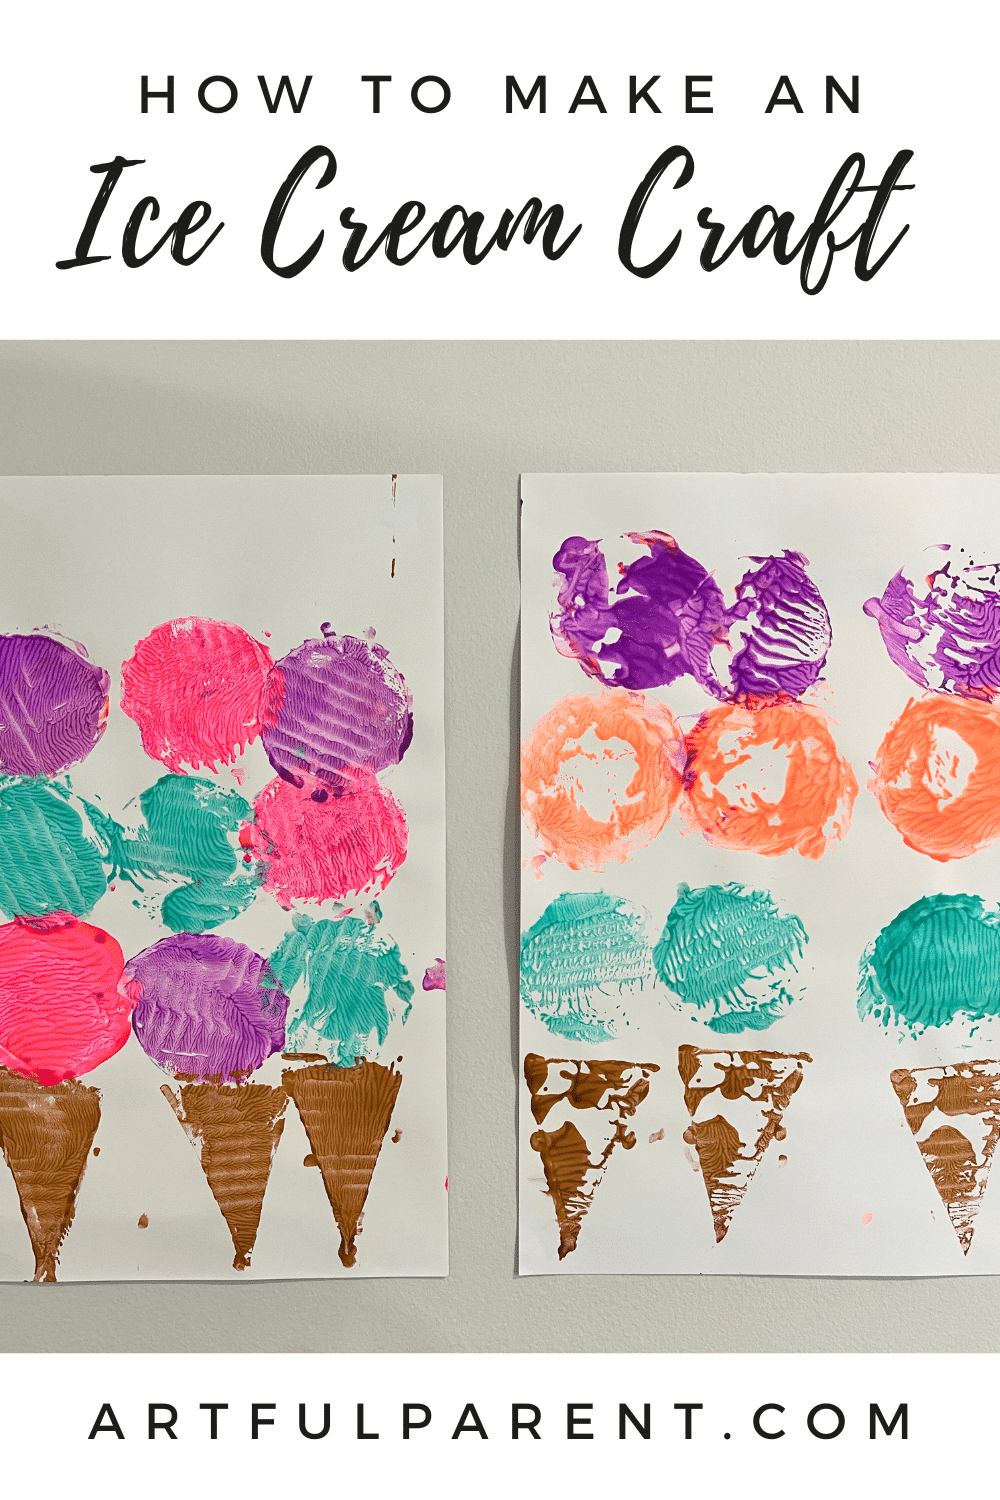 How to Make an Ice Cream Craft for Kids